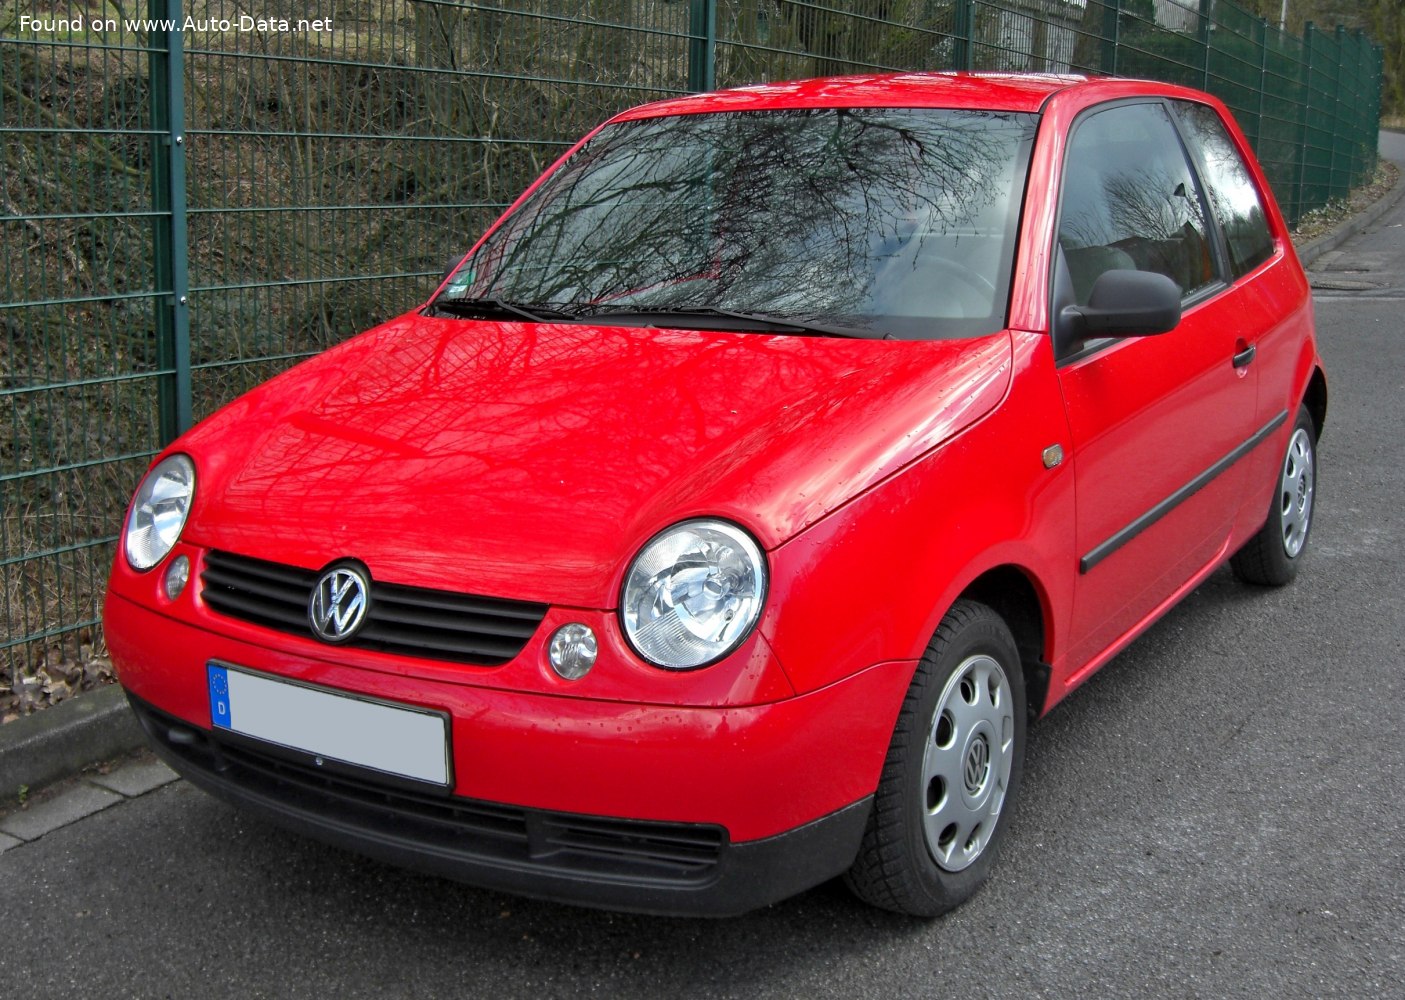 Volkswagen Lupo Costa Specs, Dimensions and Photos